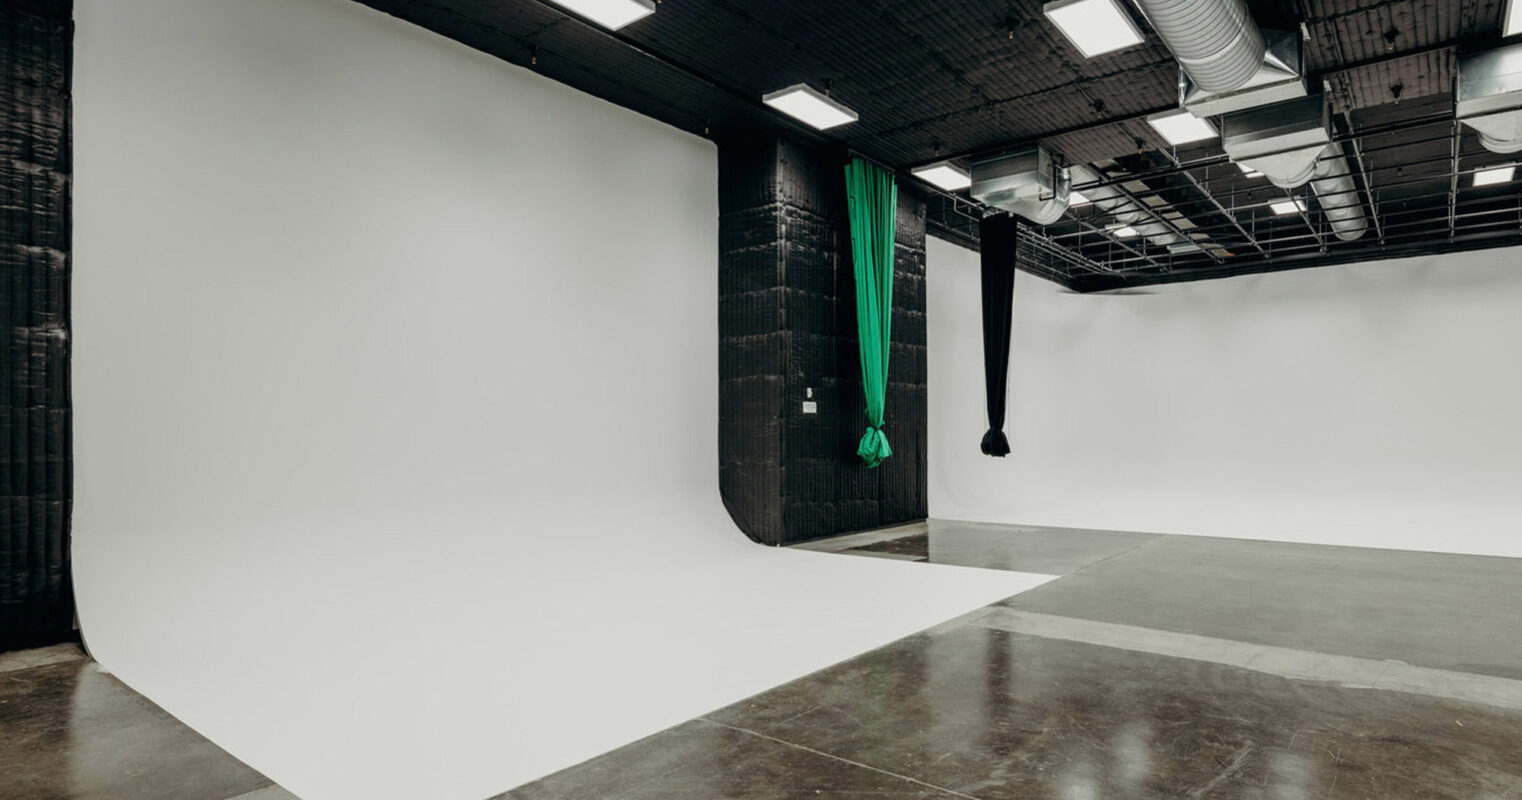 Spacious modern photo studio with a large cyclorama wall. The studio features high ceilings with exposed ductwork, concrete floors, and a harmonious blend of black and white walls for a minimalistic look. A green velvet curtain adds a touch of color and texture to the space.